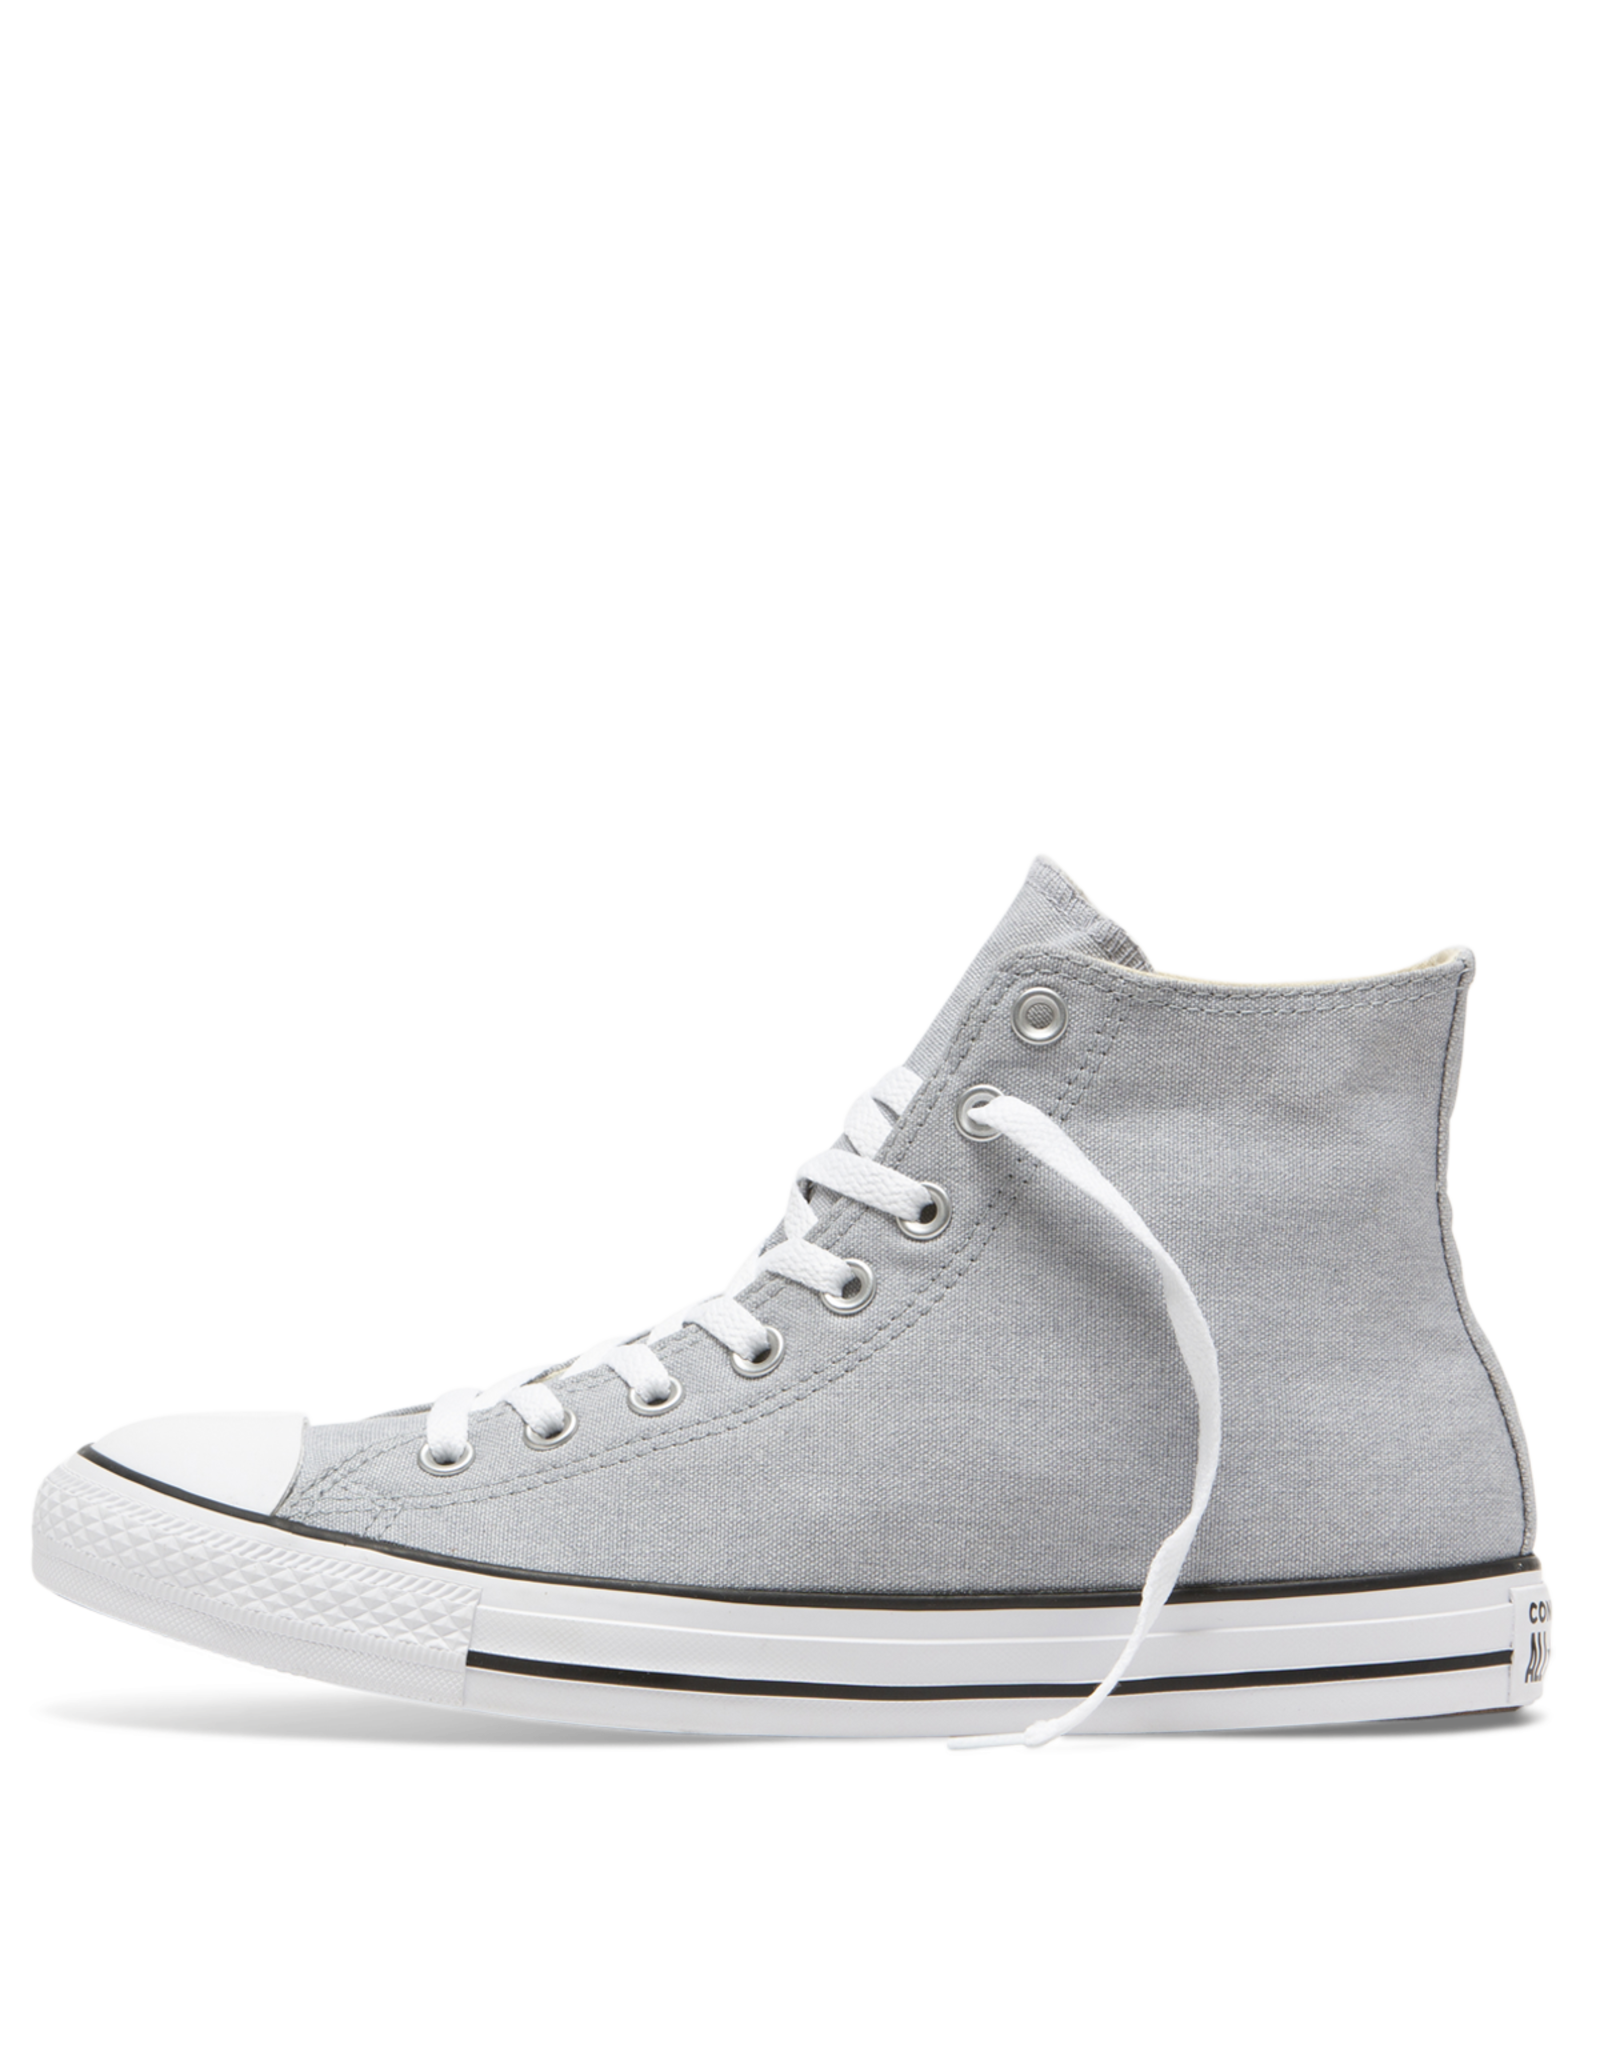 CONVERSE CHUCK TAYLOR ALL STAR HI WOLF GREY/NATURAL IVORY/WHITE C19WG-164449C